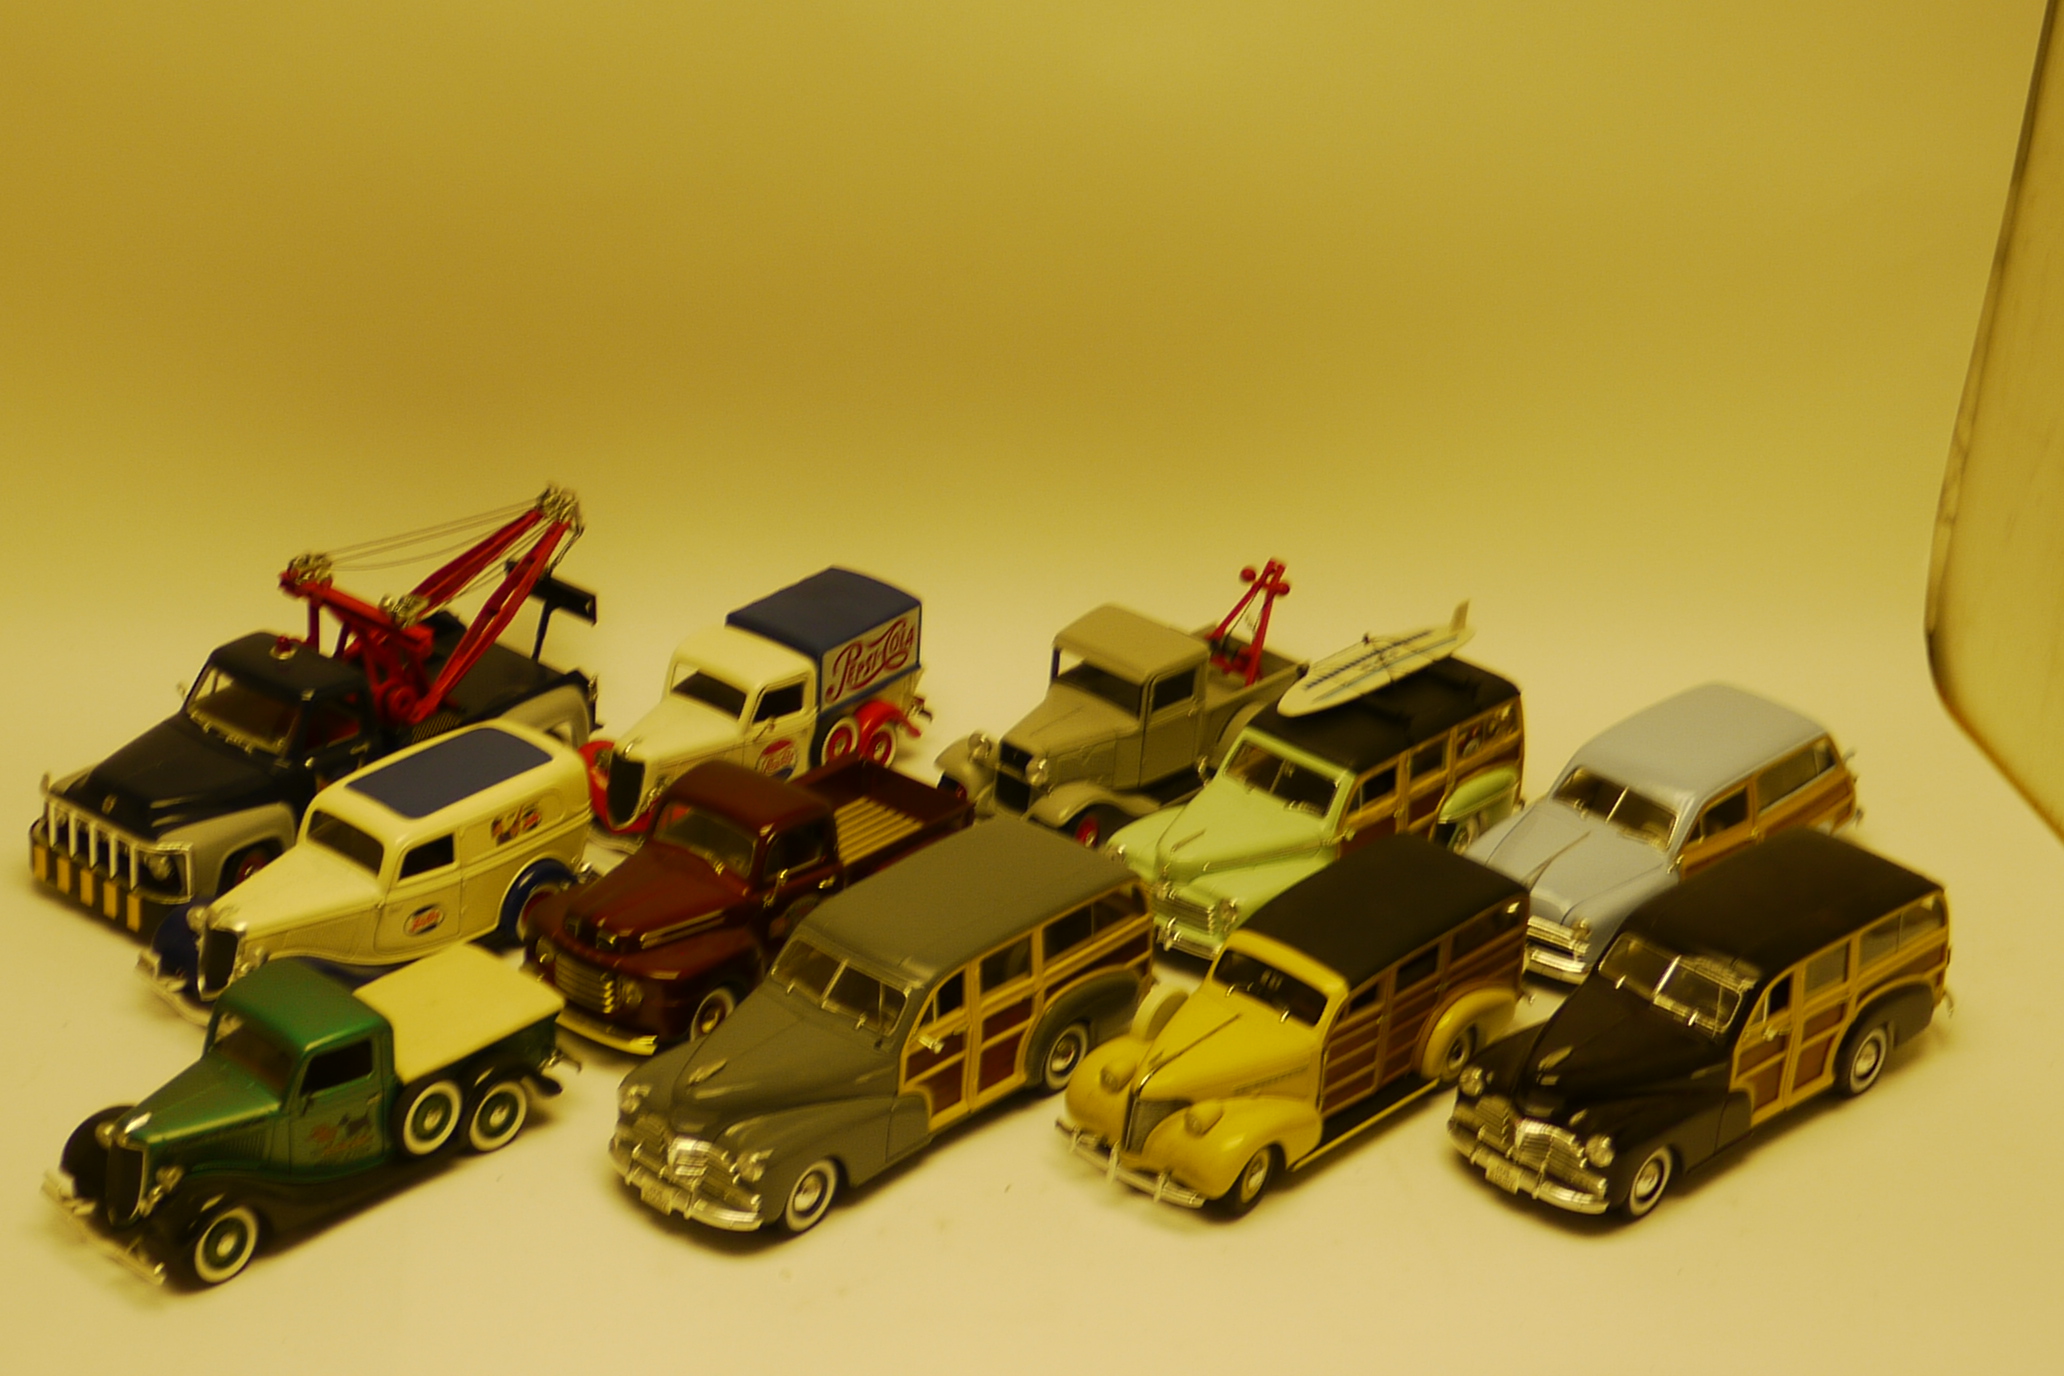 Unboxed 1:18 and 1:19 Scale Models, A collection of vintage American private and commercial